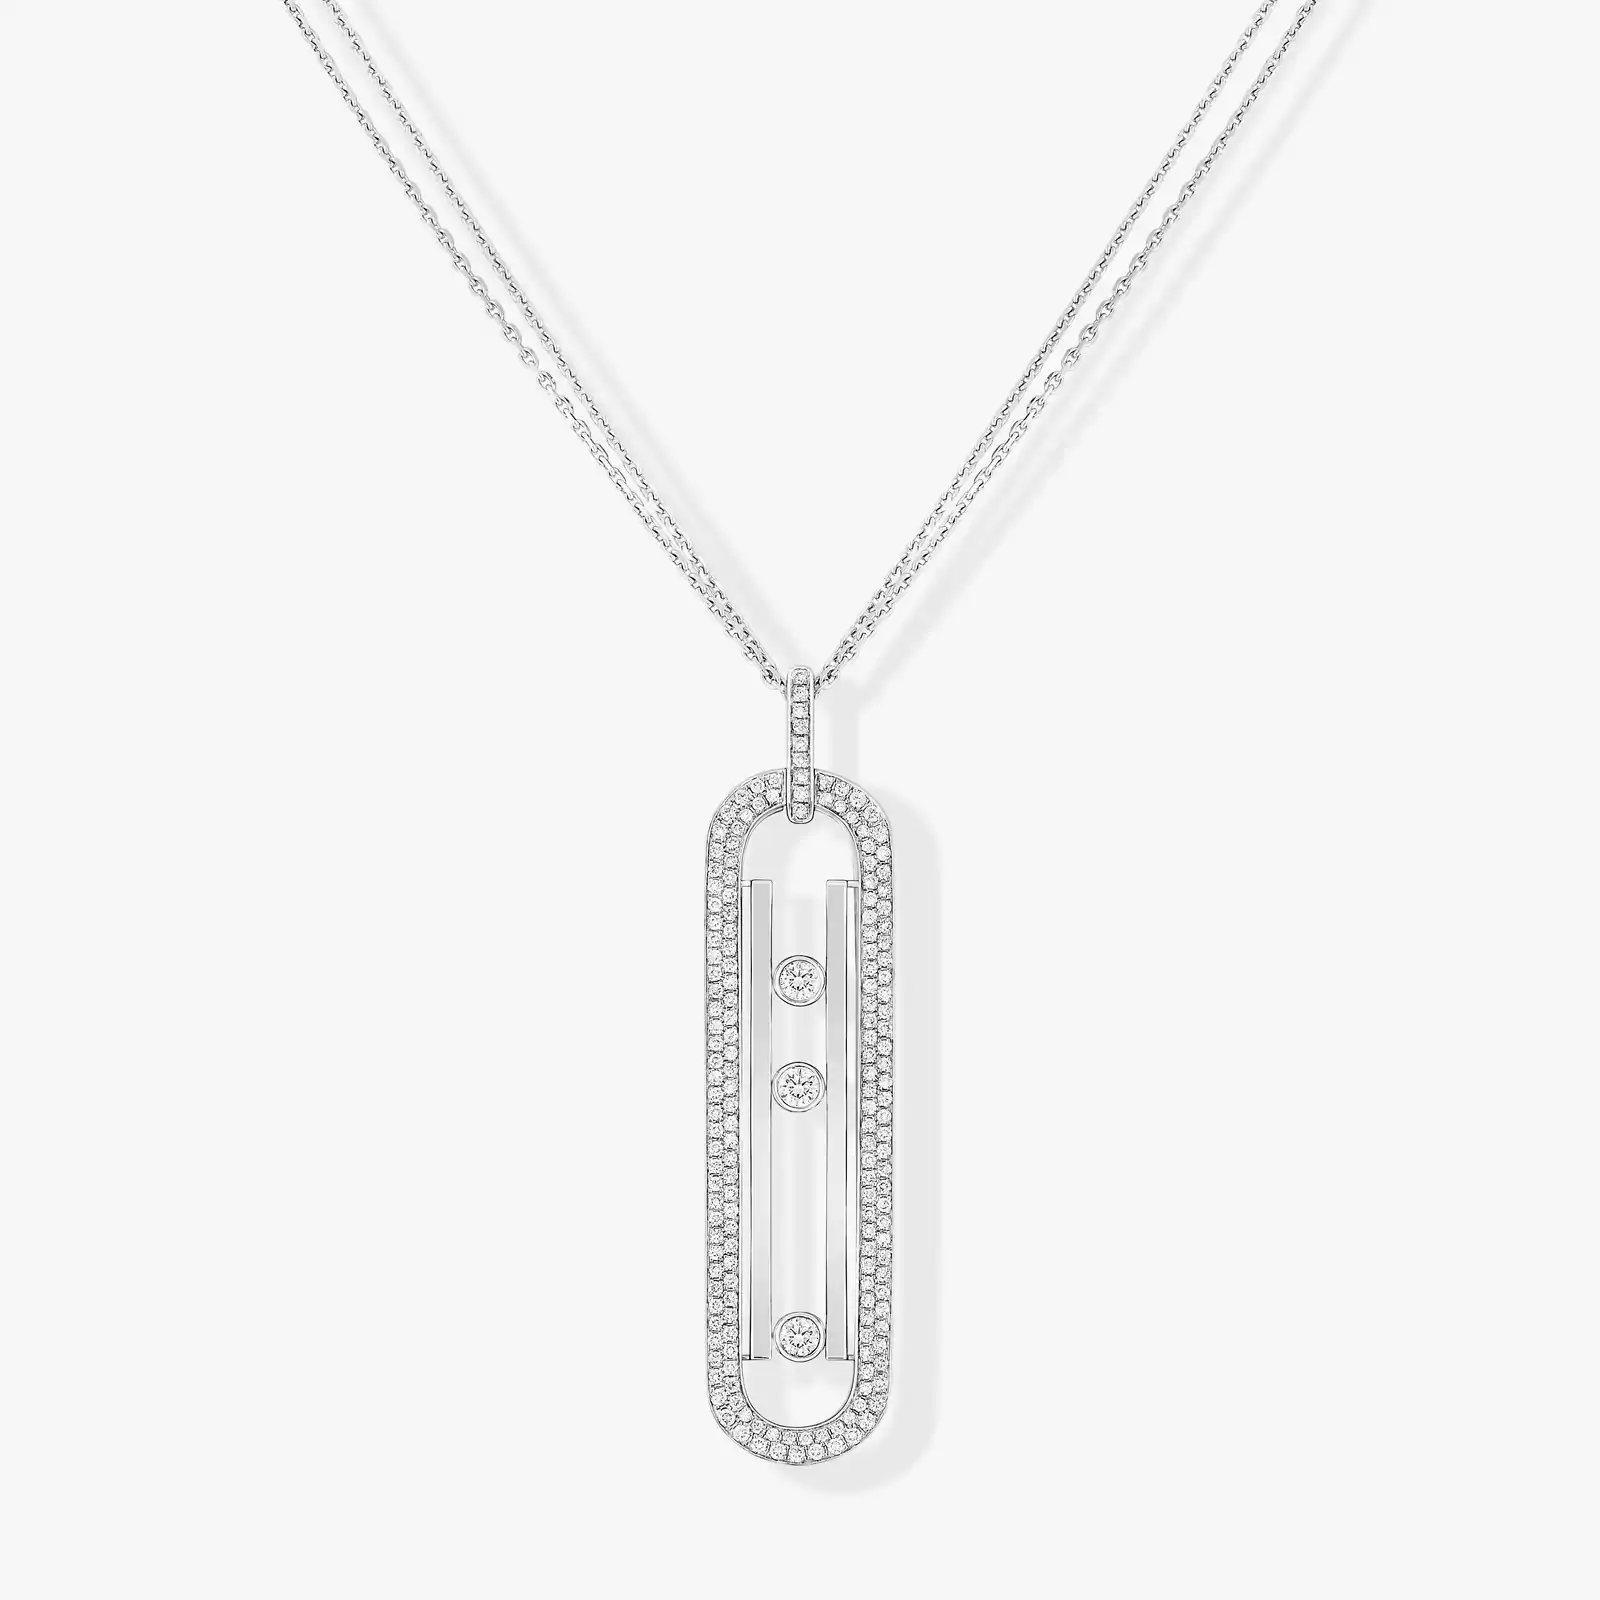 Sautoir Move 10th Anniversary White Gold For Her Diamond Necklace 07228-WG